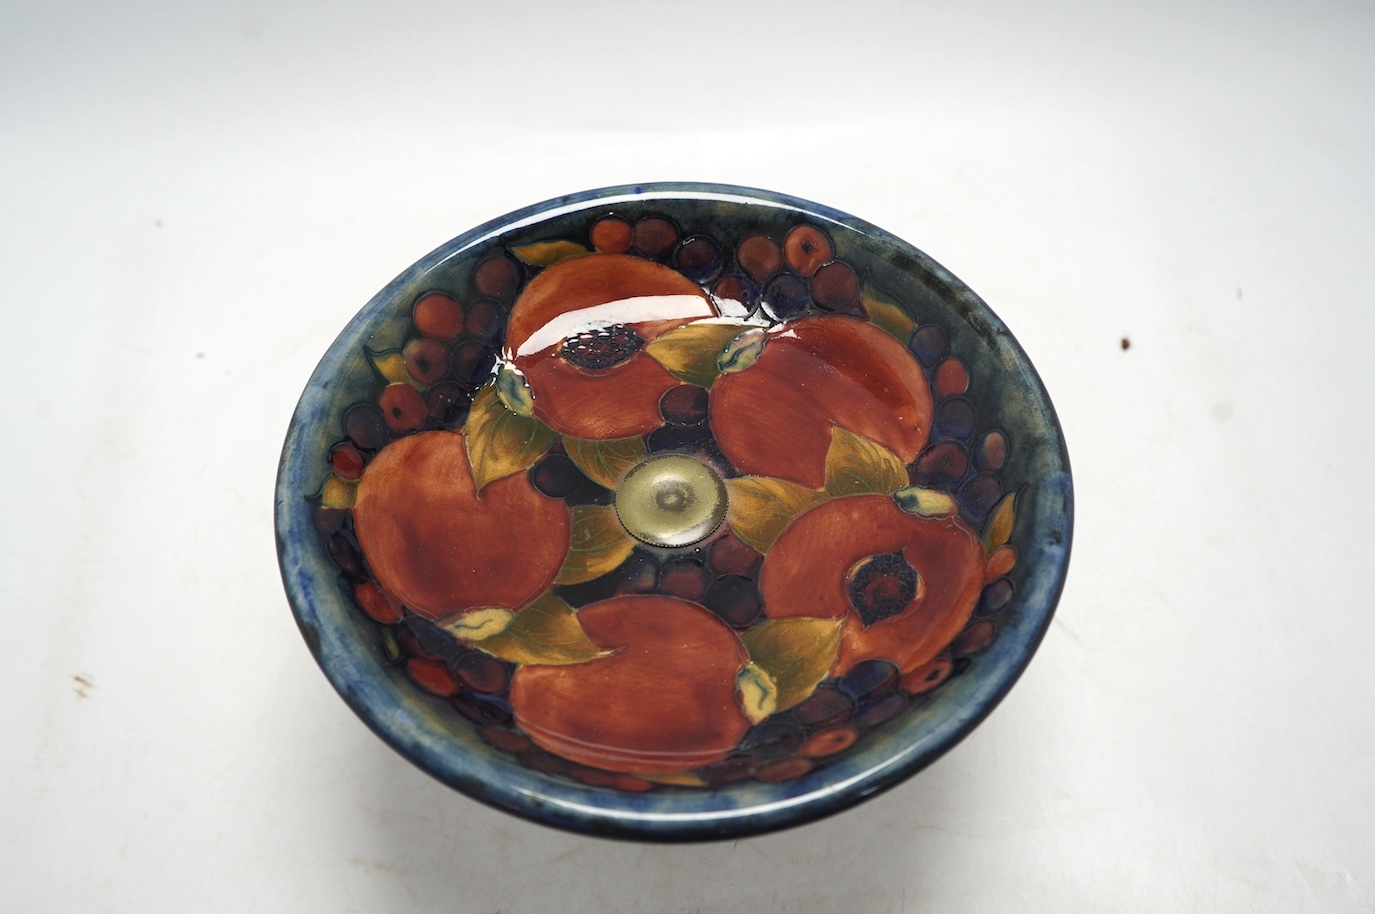 A Moorcroft Pomegranate comport, on plated metal pedestal, 14.5cm. Condition - fair, some wear to plating